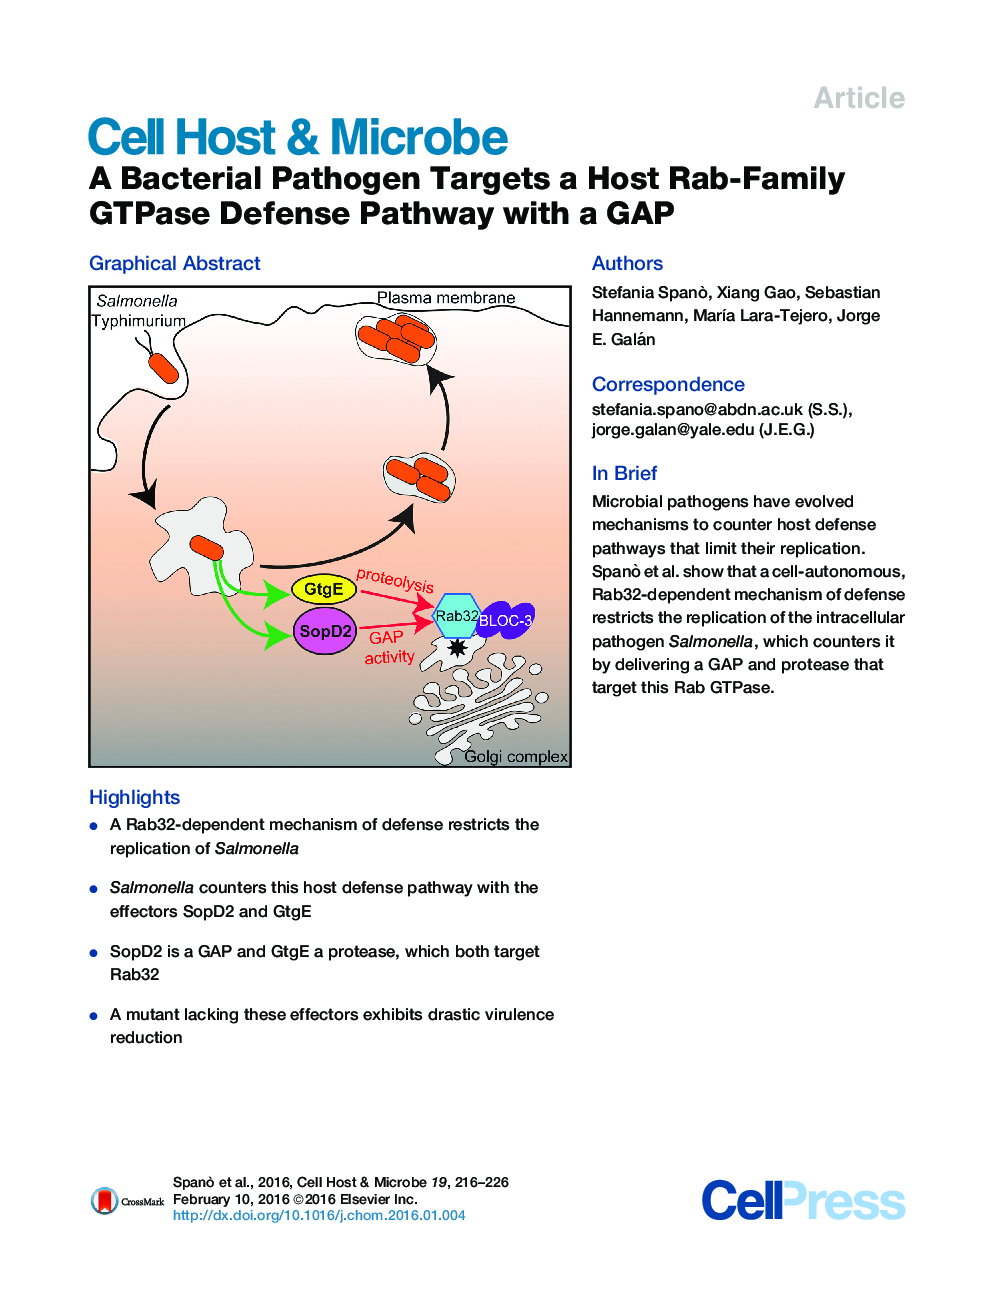 A Bacterial Pathogen Targets a Host Rab-Family GTPase Defense Pathway with a GAP